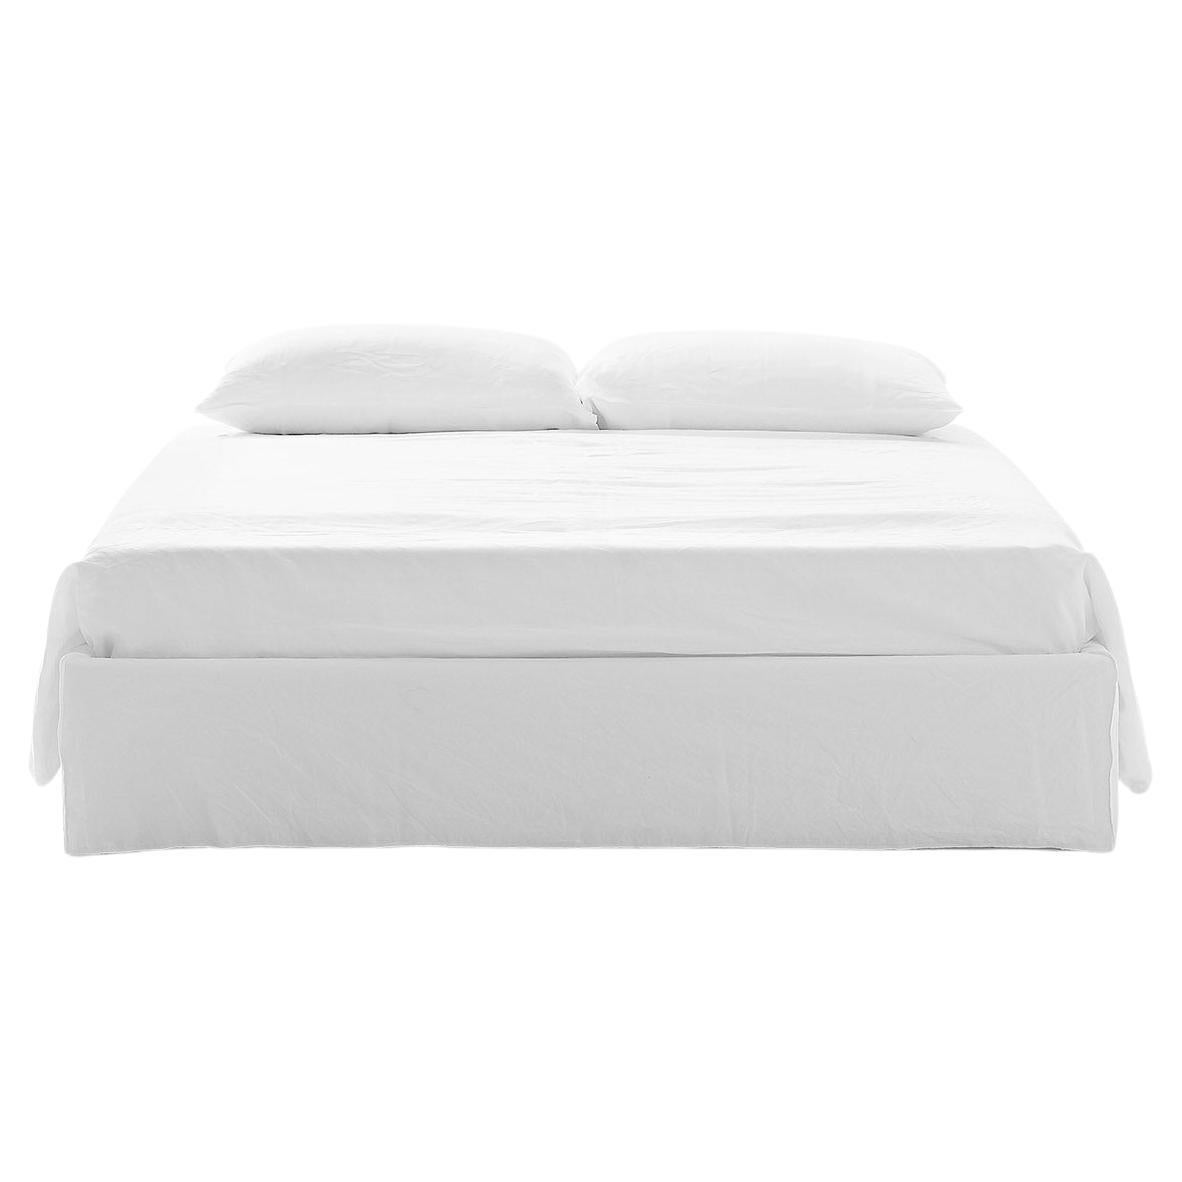 Gervasoni Ghost 80 XL Bed in White Linen Upholstery by Paola Navone For Sale